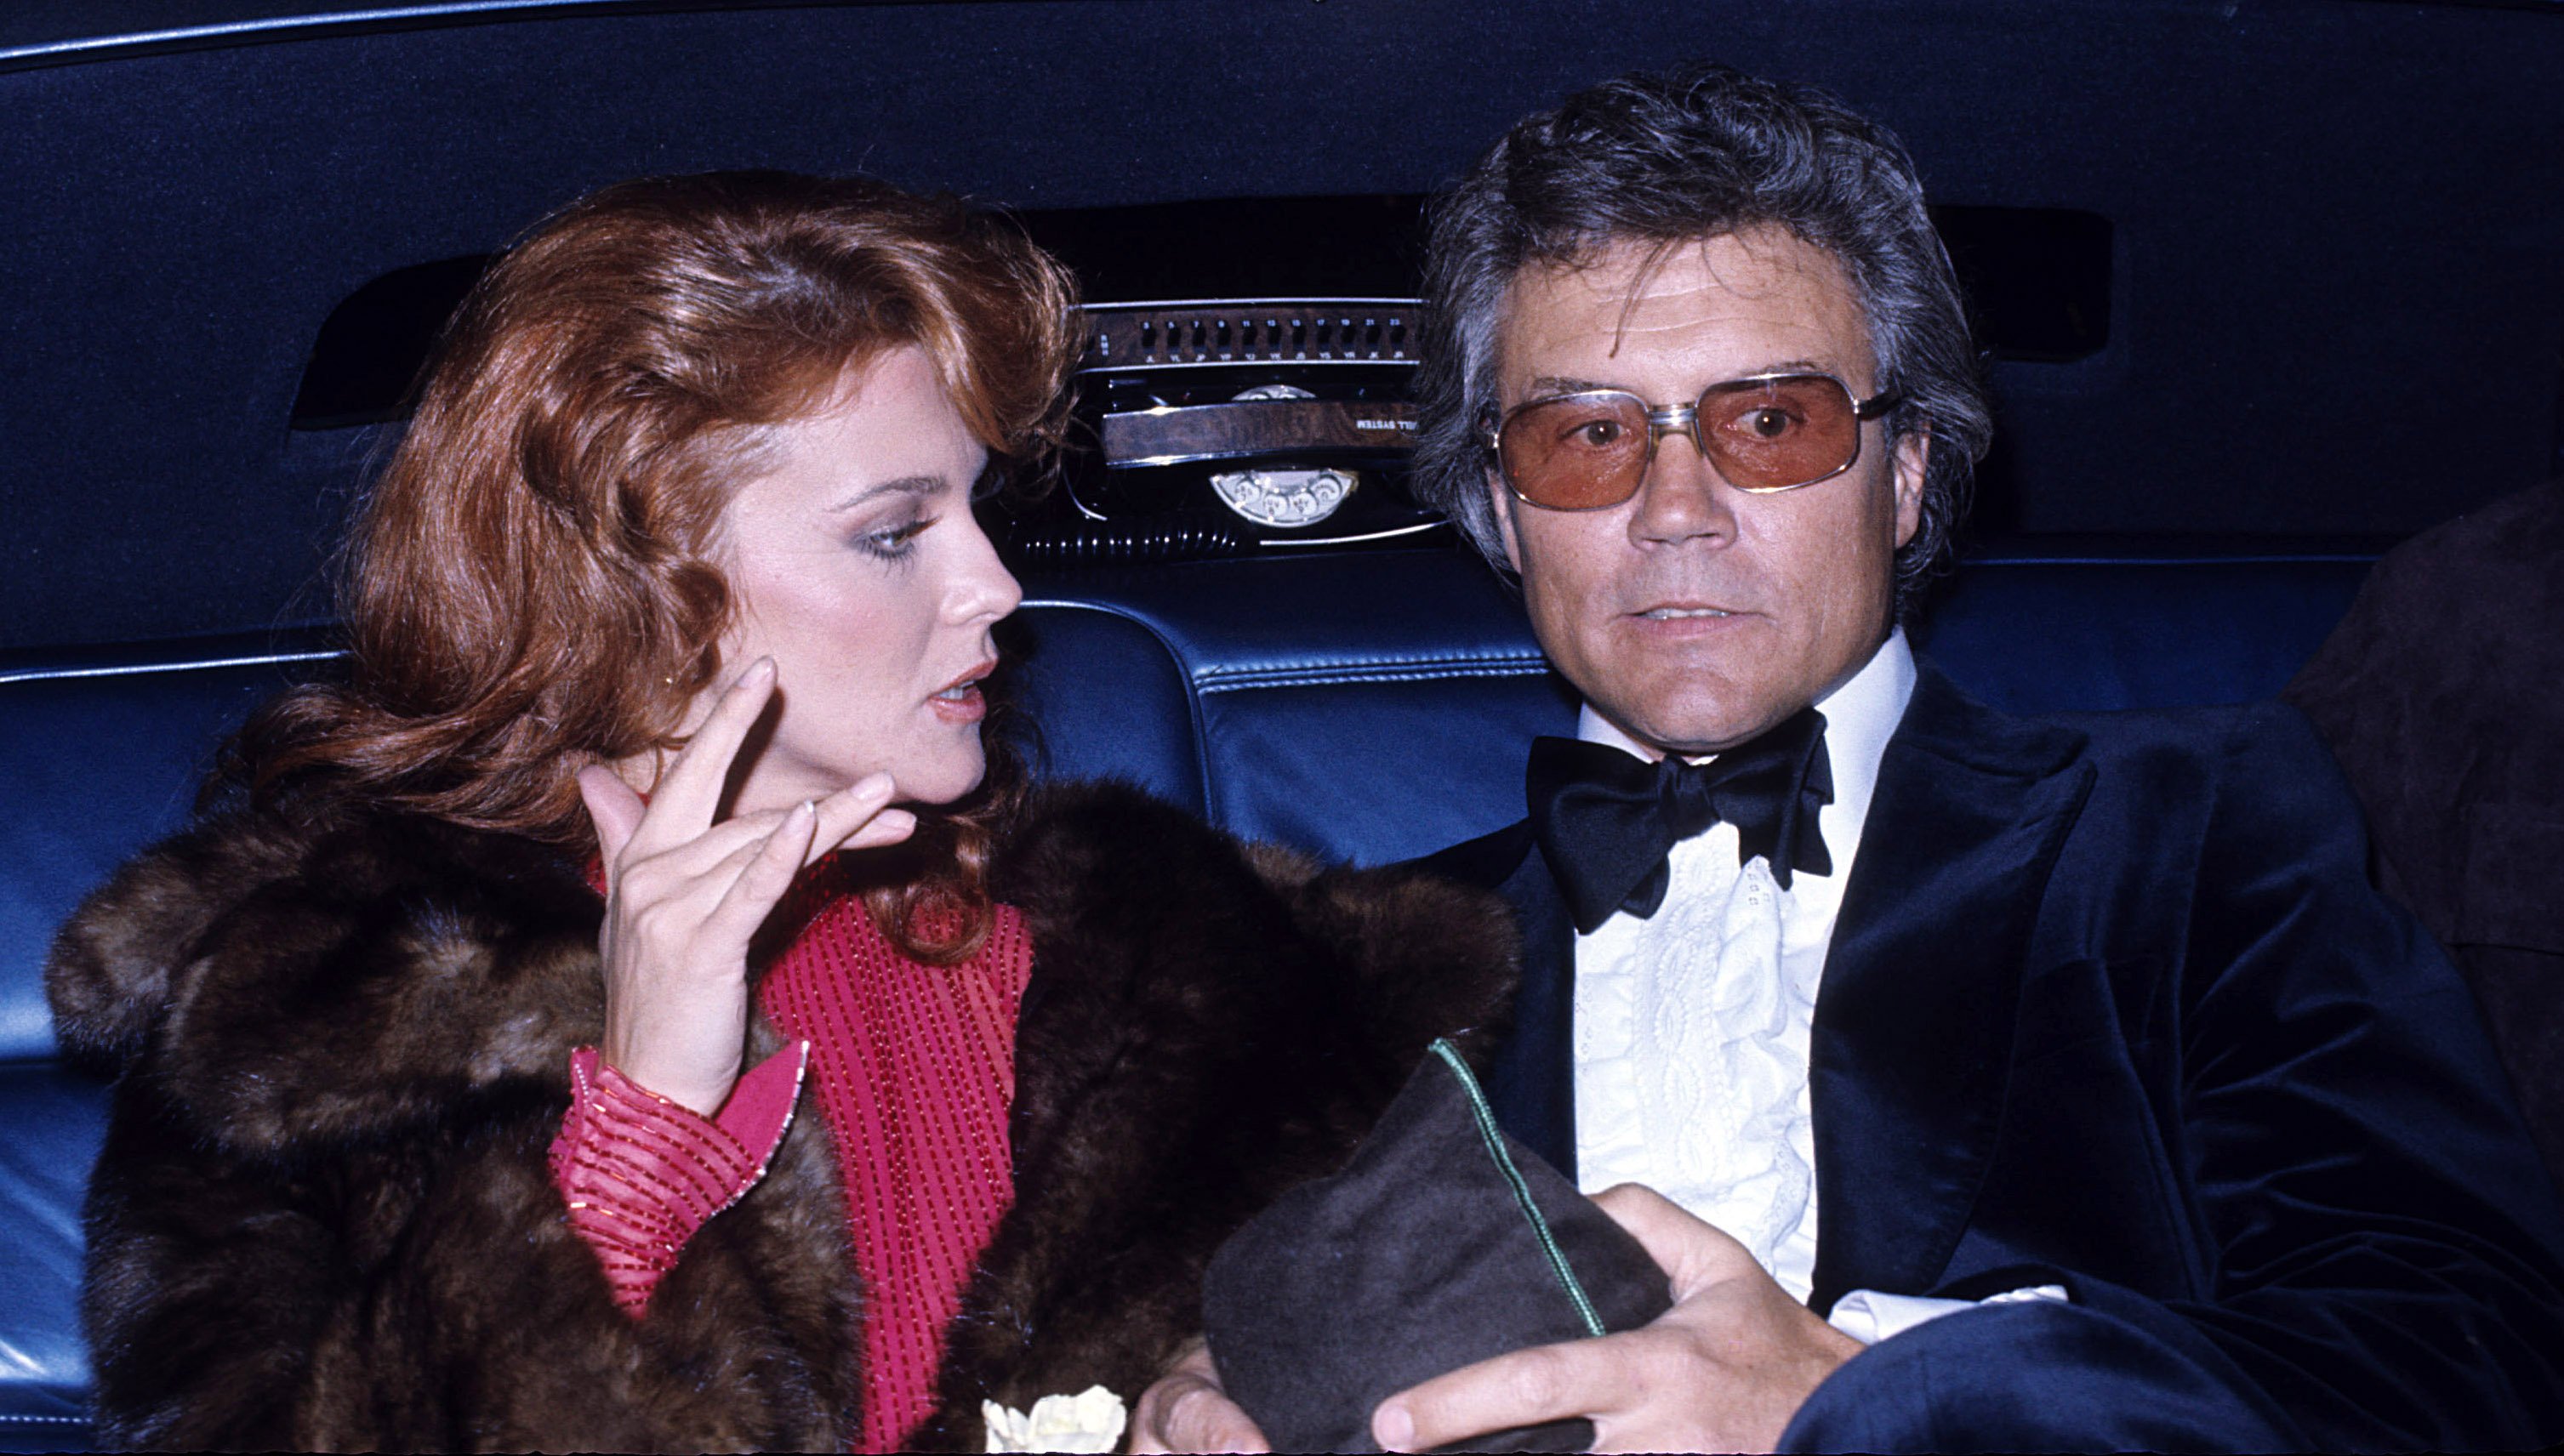 Ann-Margret and Roger Smith during a sighting at The Waldorf Astoria Hotel in 1972 in New York. / Source: Getty Images